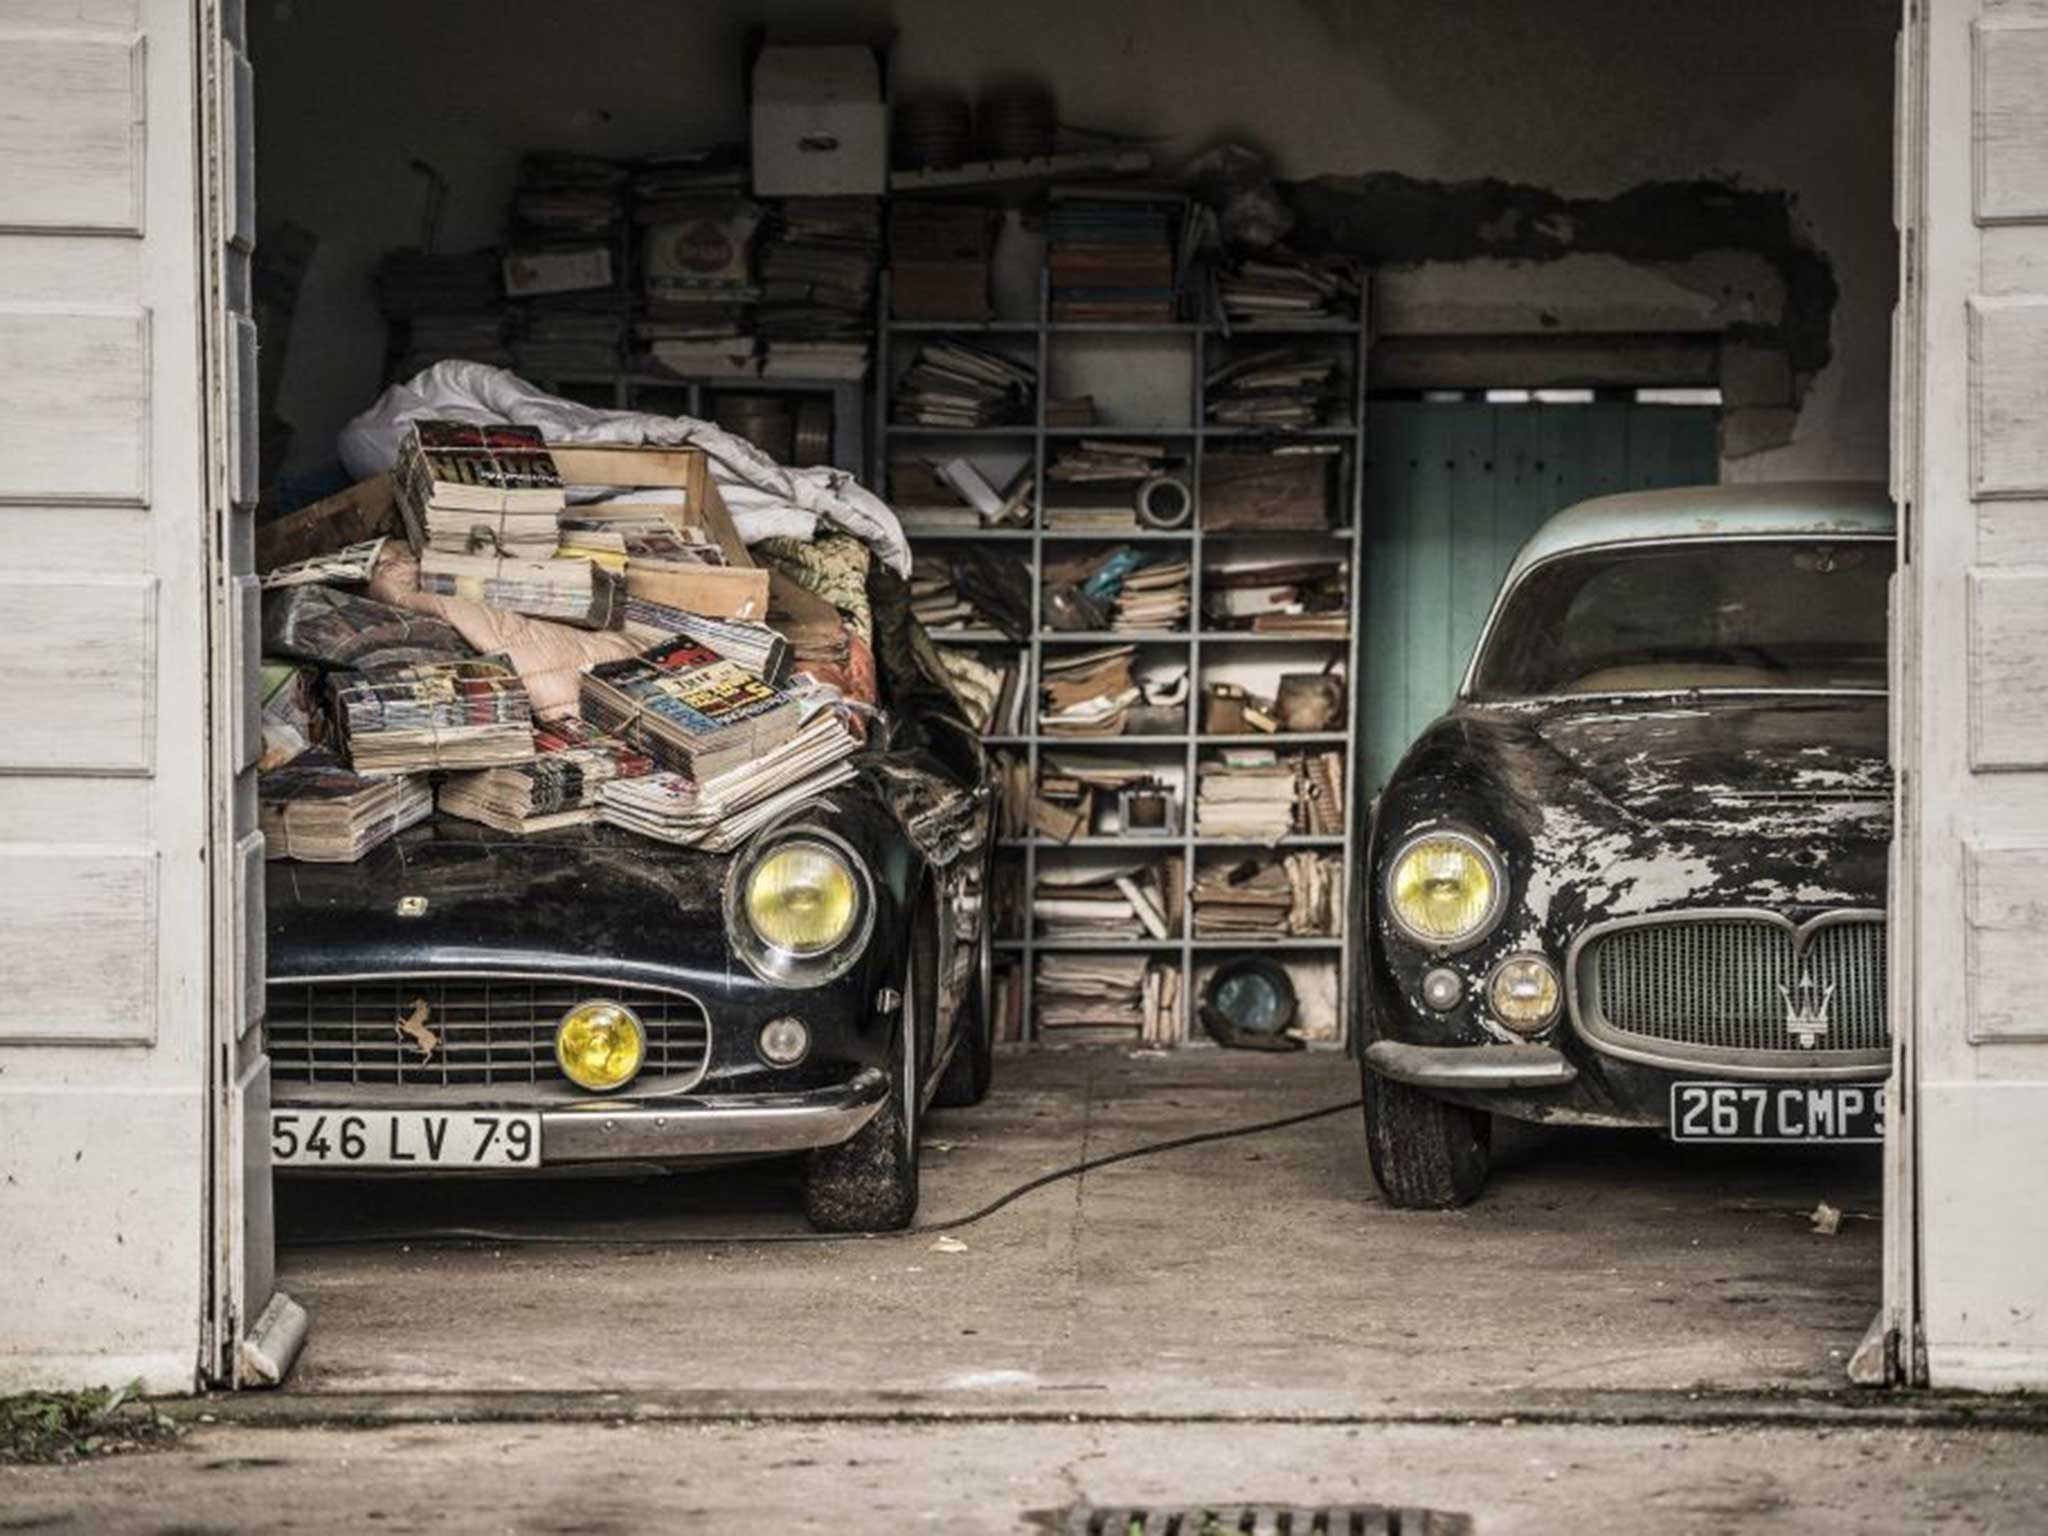 The 1961 Ferrari 250 GT SWB California Spyder (left) owned by Alain Delon as it was discovered in a remote farm in western France